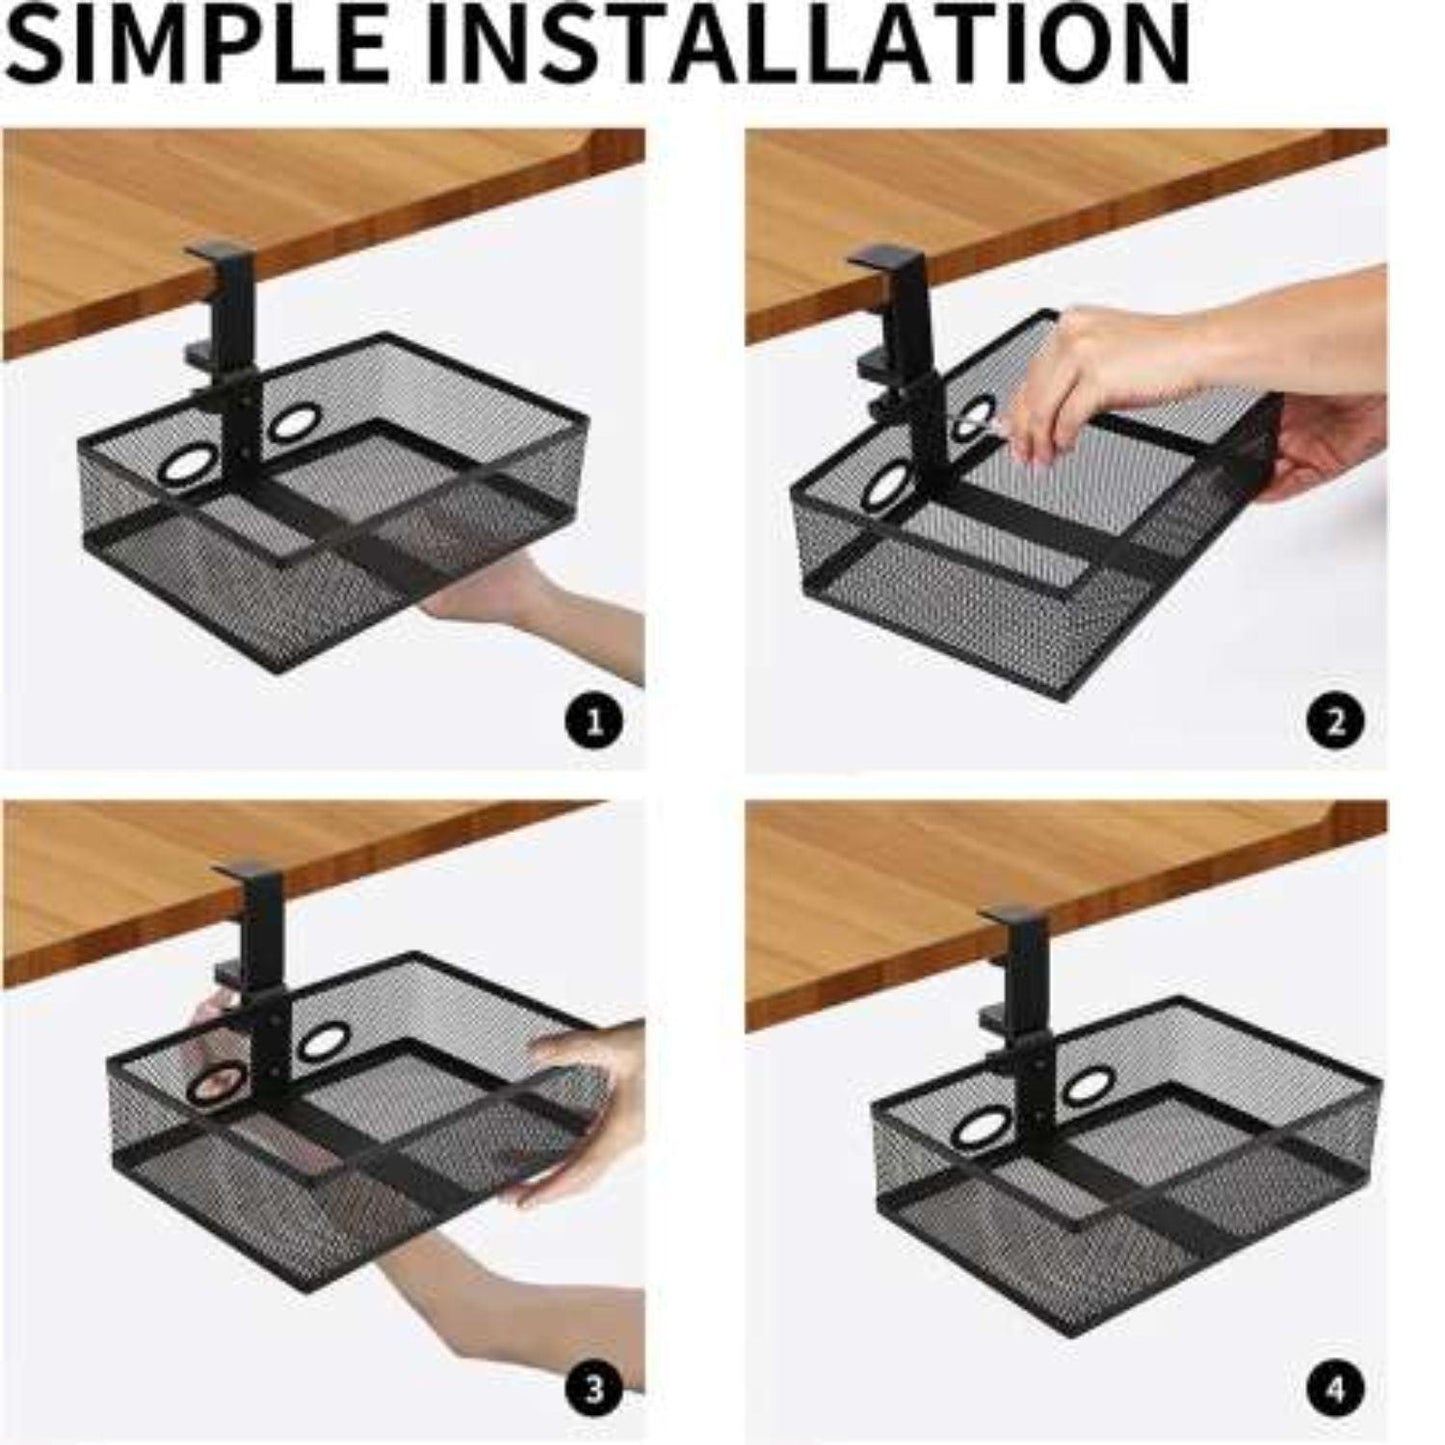 Swivel Cable Management Tray Organizer Under Desk for Office and Home No Drill - GADGET WAGON Desk Arm